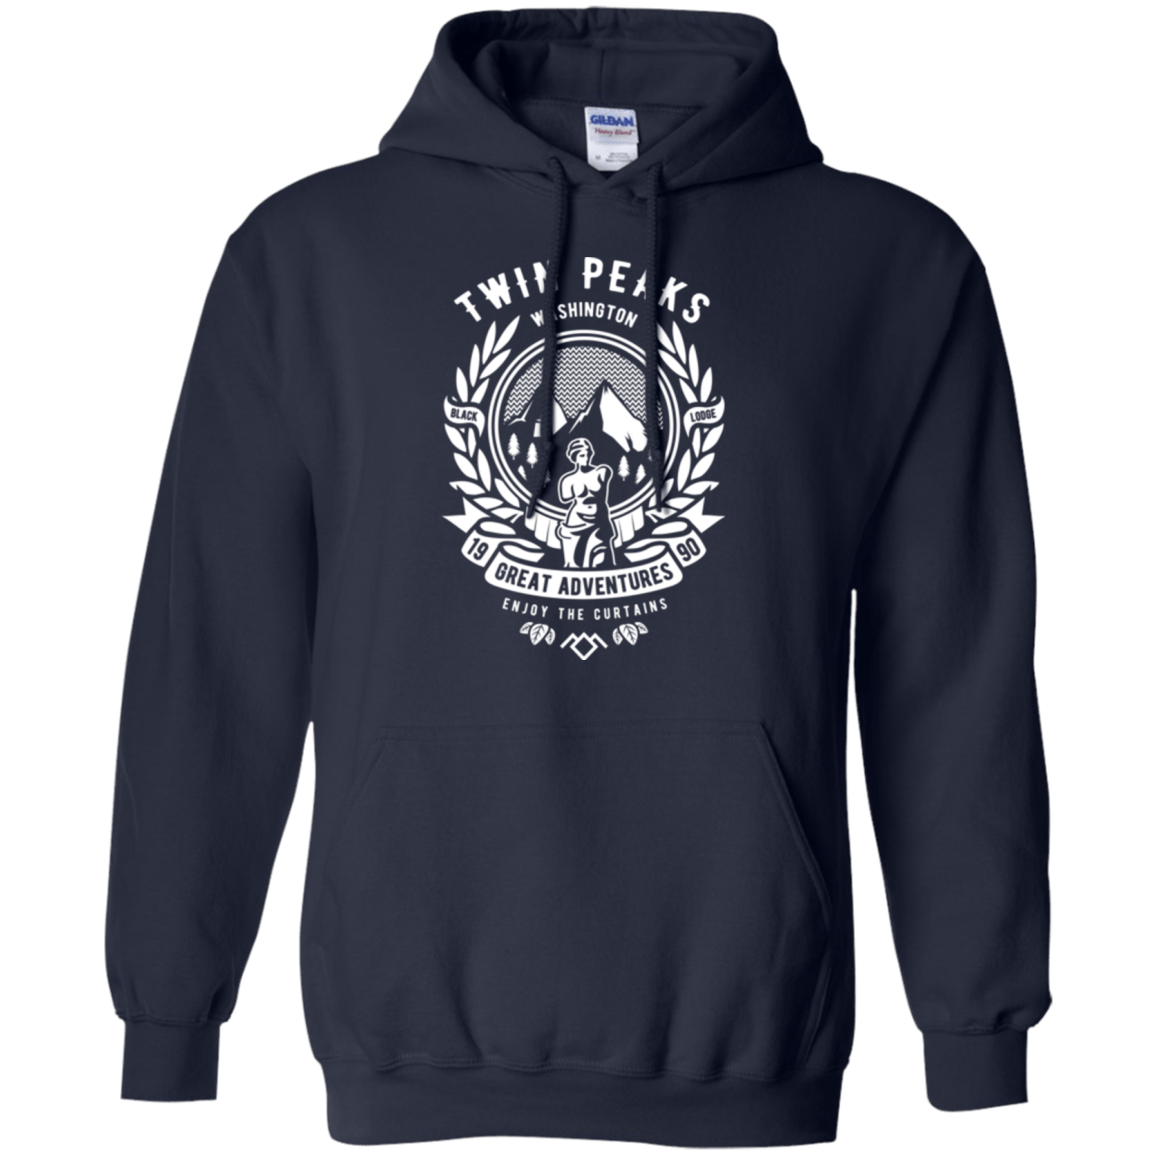 Sweatshirts Navy / Small ENJOY THE CURTAINS Pullover Hoodie